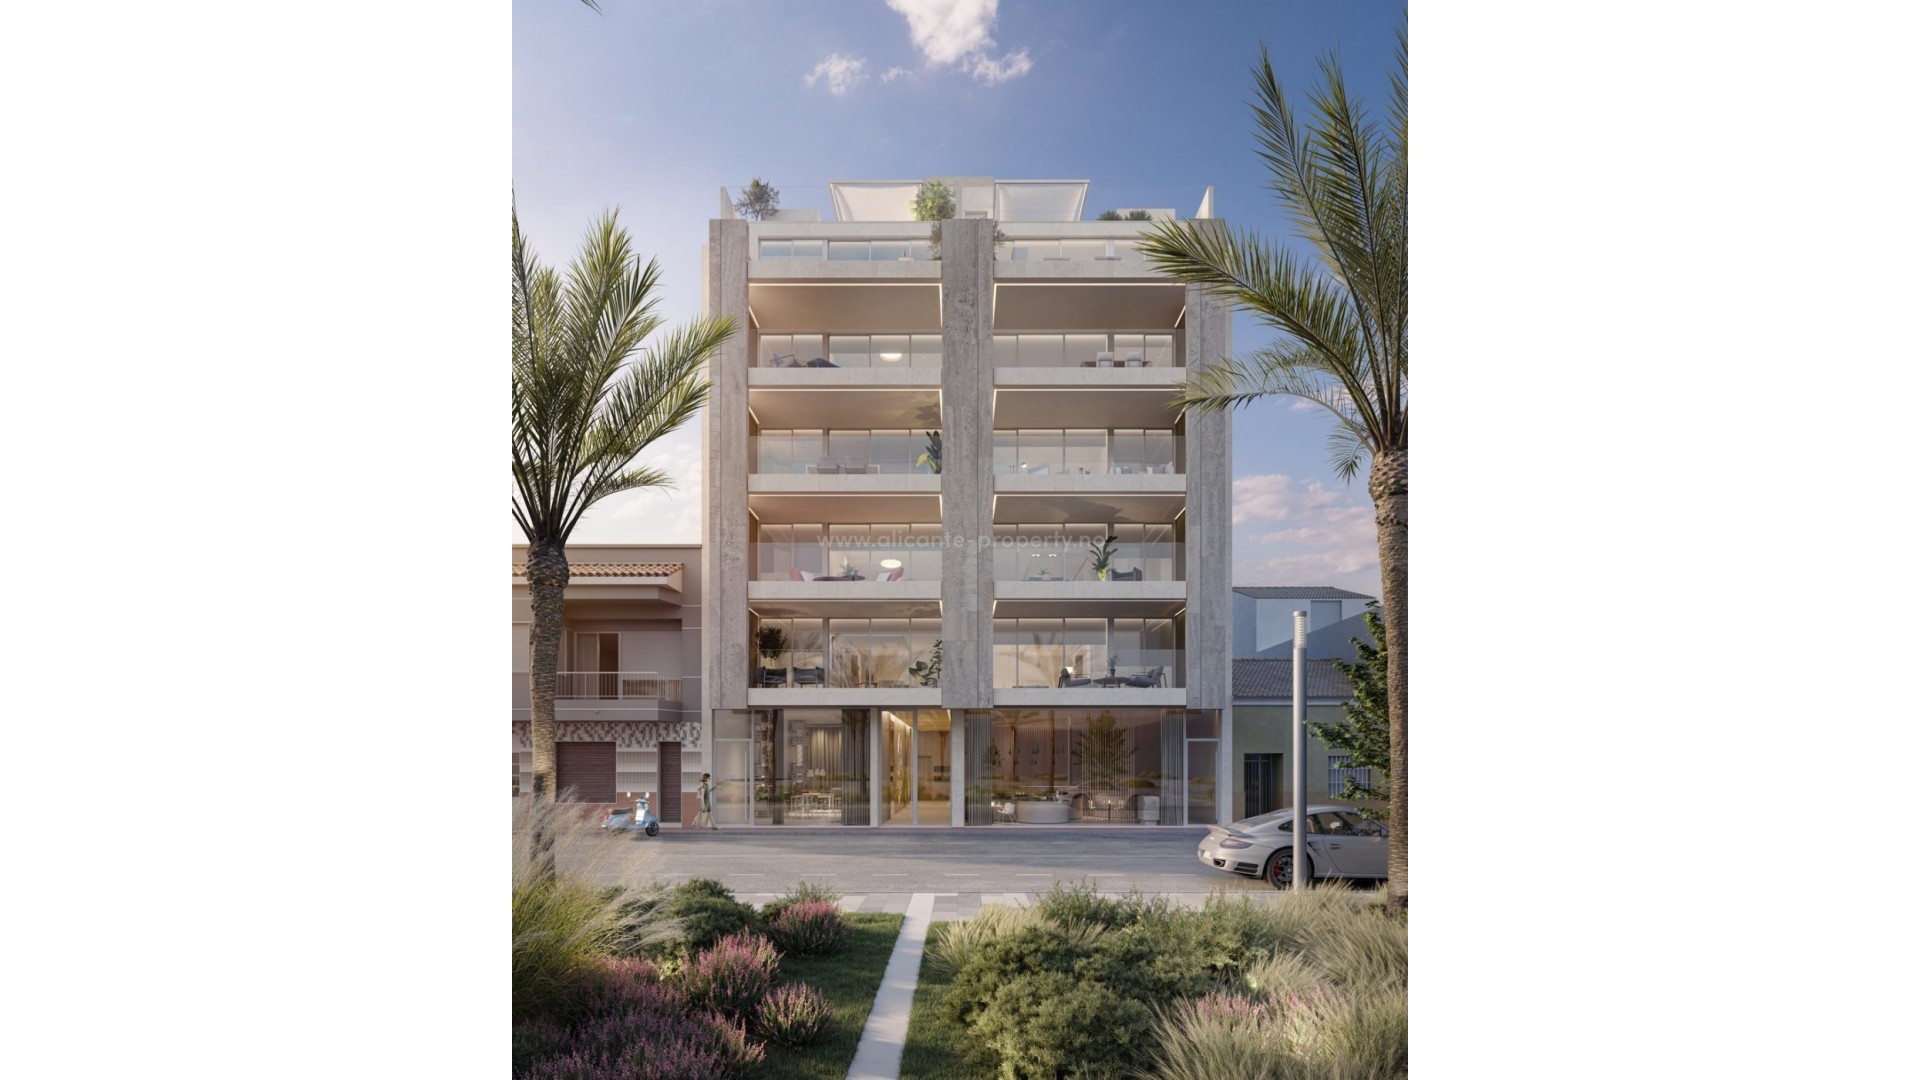 Penthouse apartments in La Mata,Torrevieja, 3 bedrooms, 2 bathrooms, large shared roof terrace with jacuzzi and west facing views, underground parking spaces